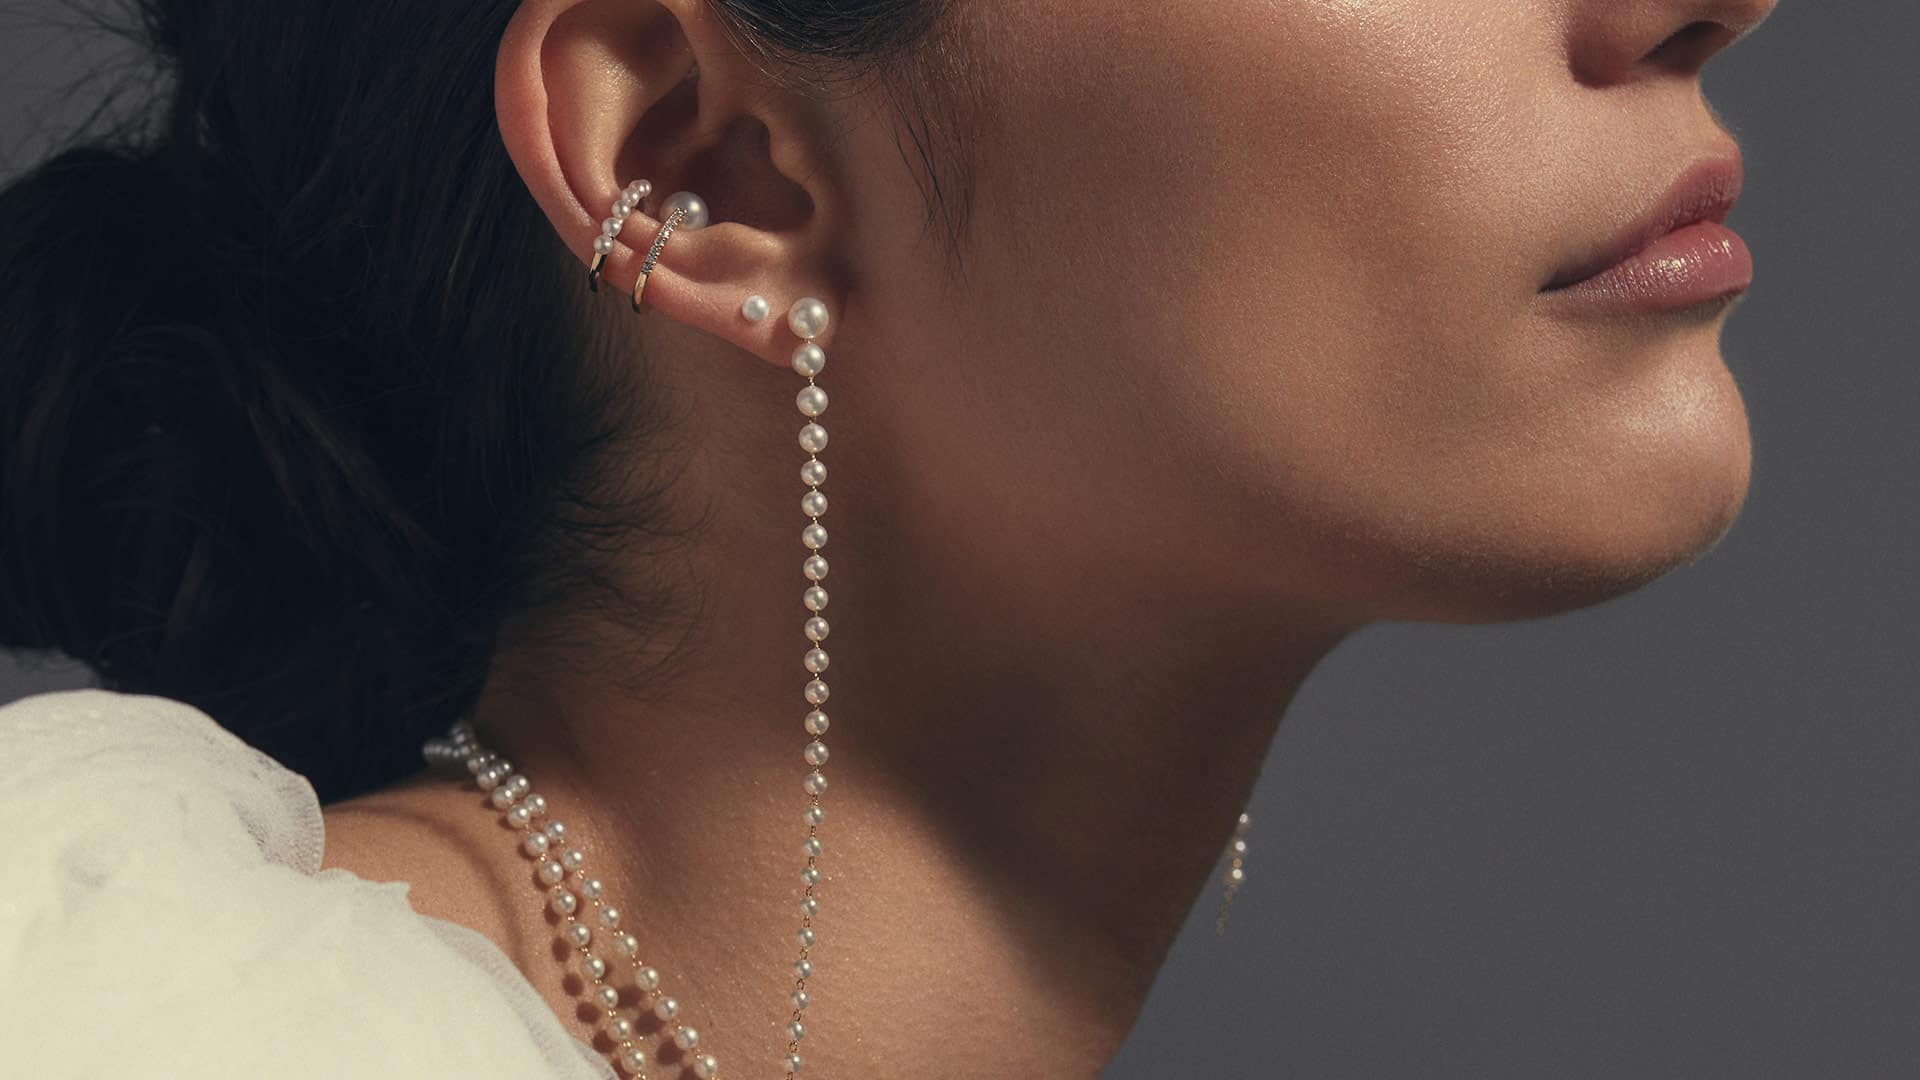 What Dream About Pearls Means